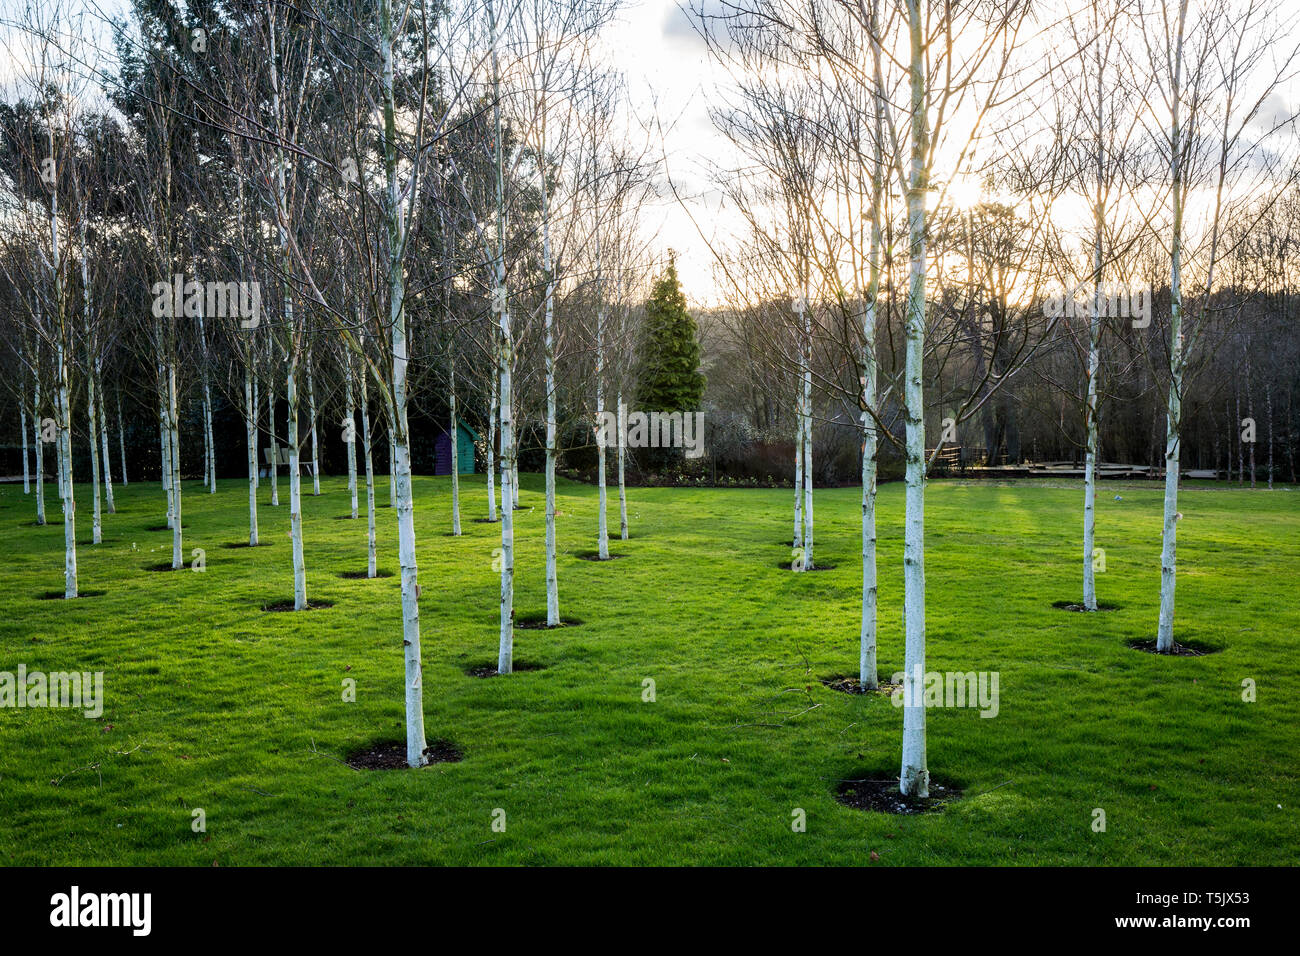 A garden in winter, white birch trees with pale trunks in grass. Stock Photo